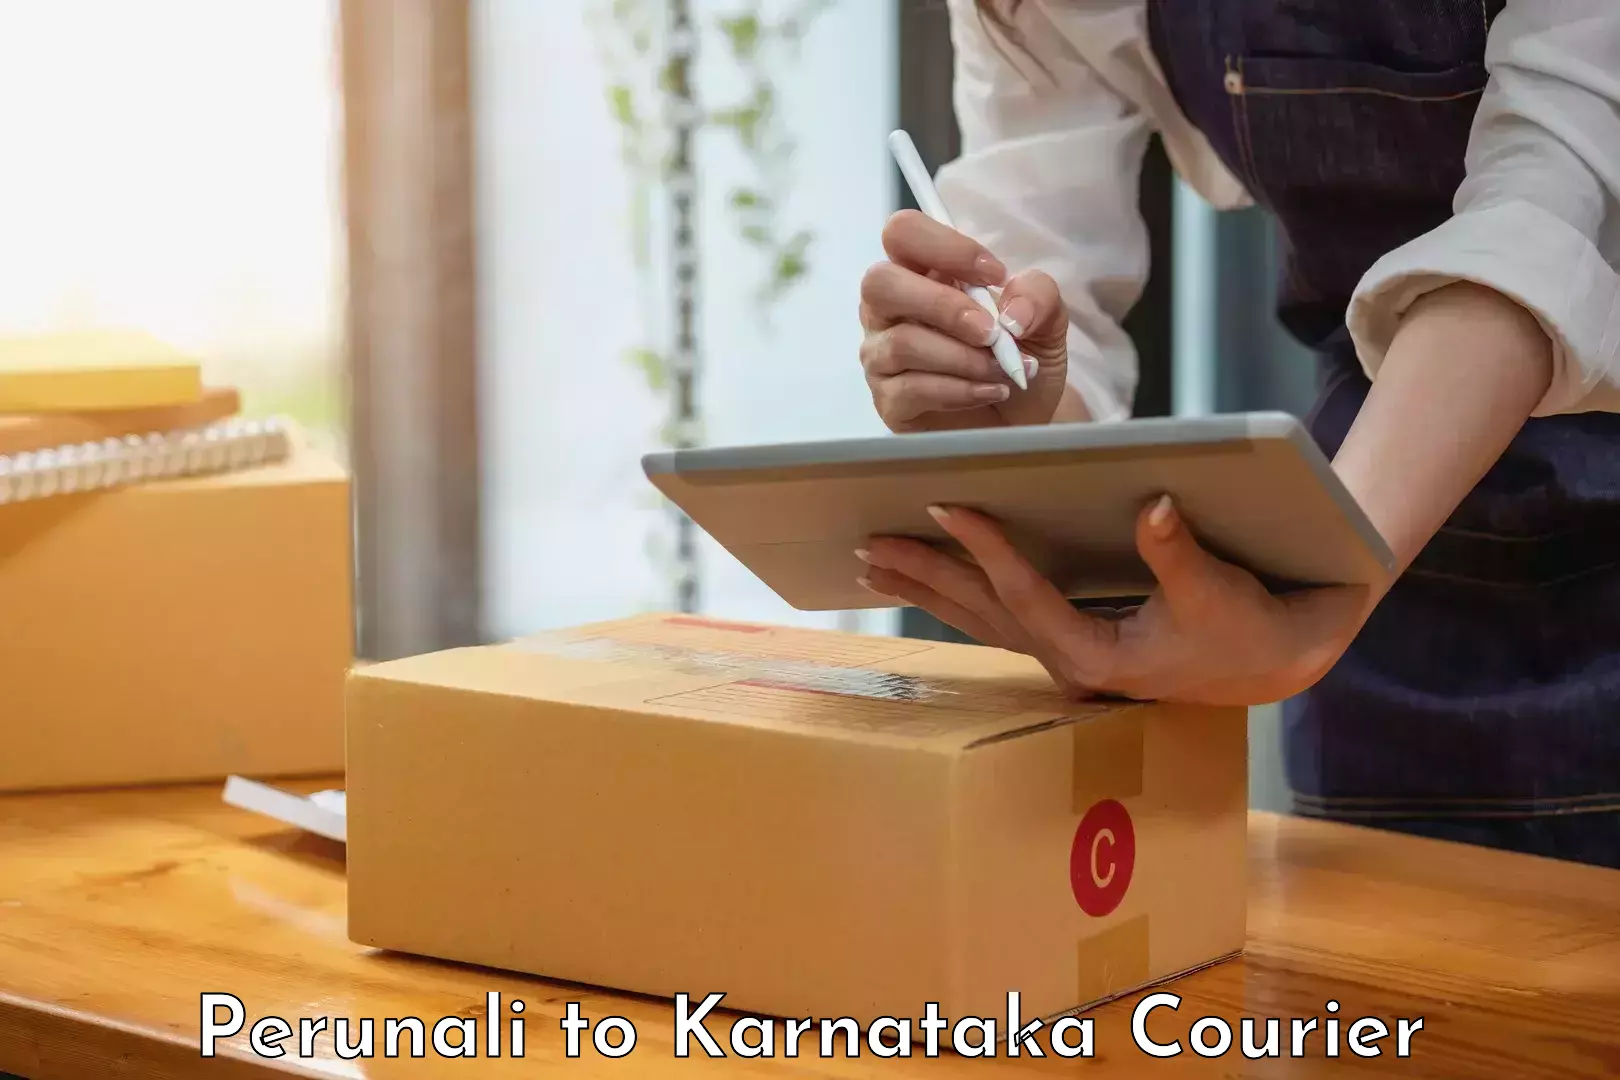 24-hour courier services Perunali to Kulshekar